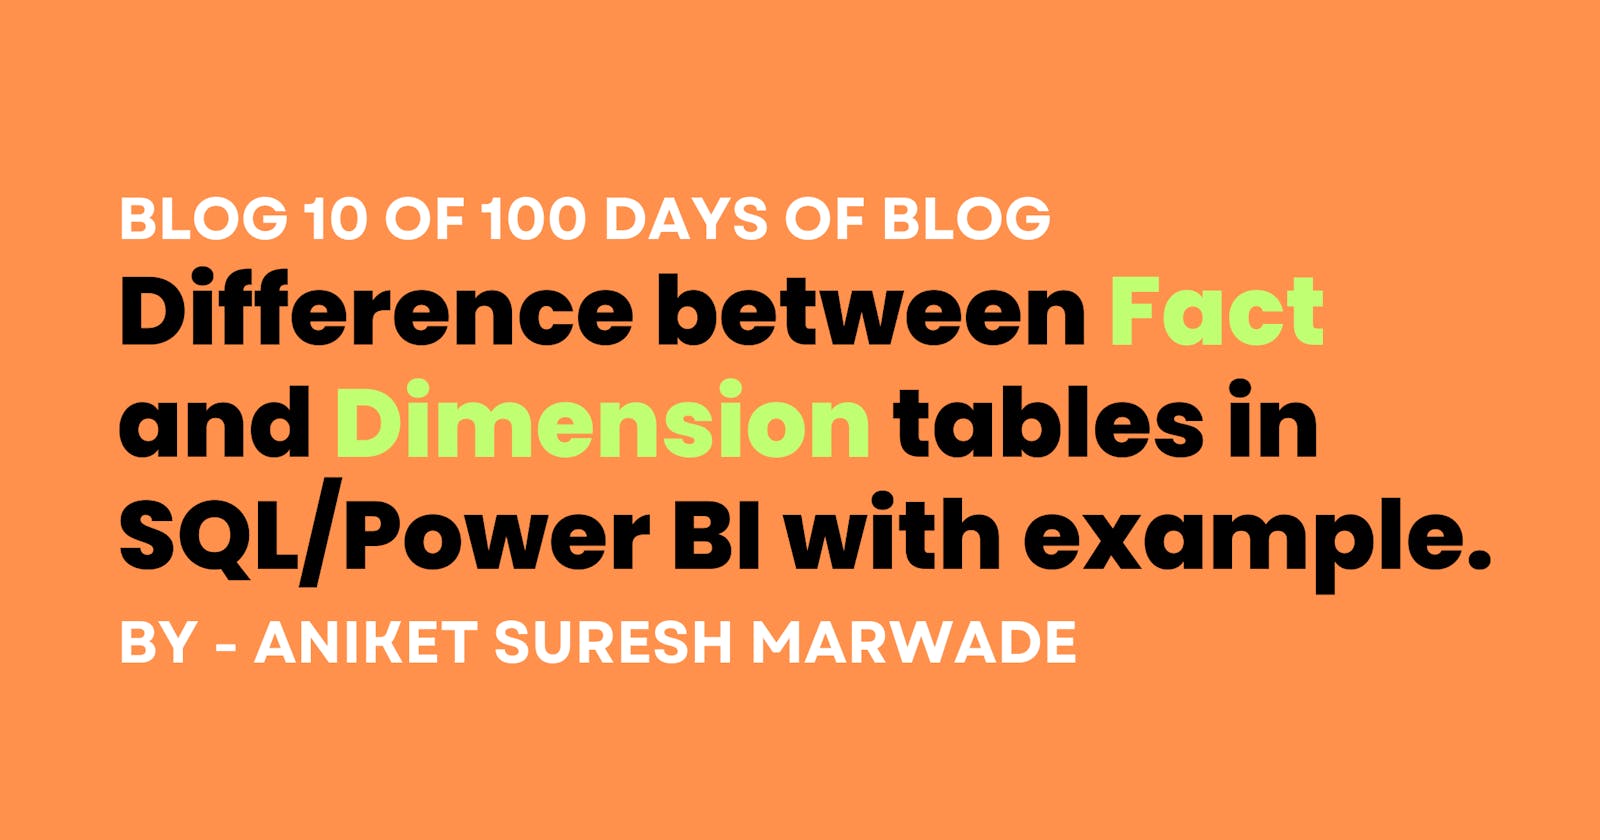 Difference between Fact and Dimension tables in SQL/Power BI with example.